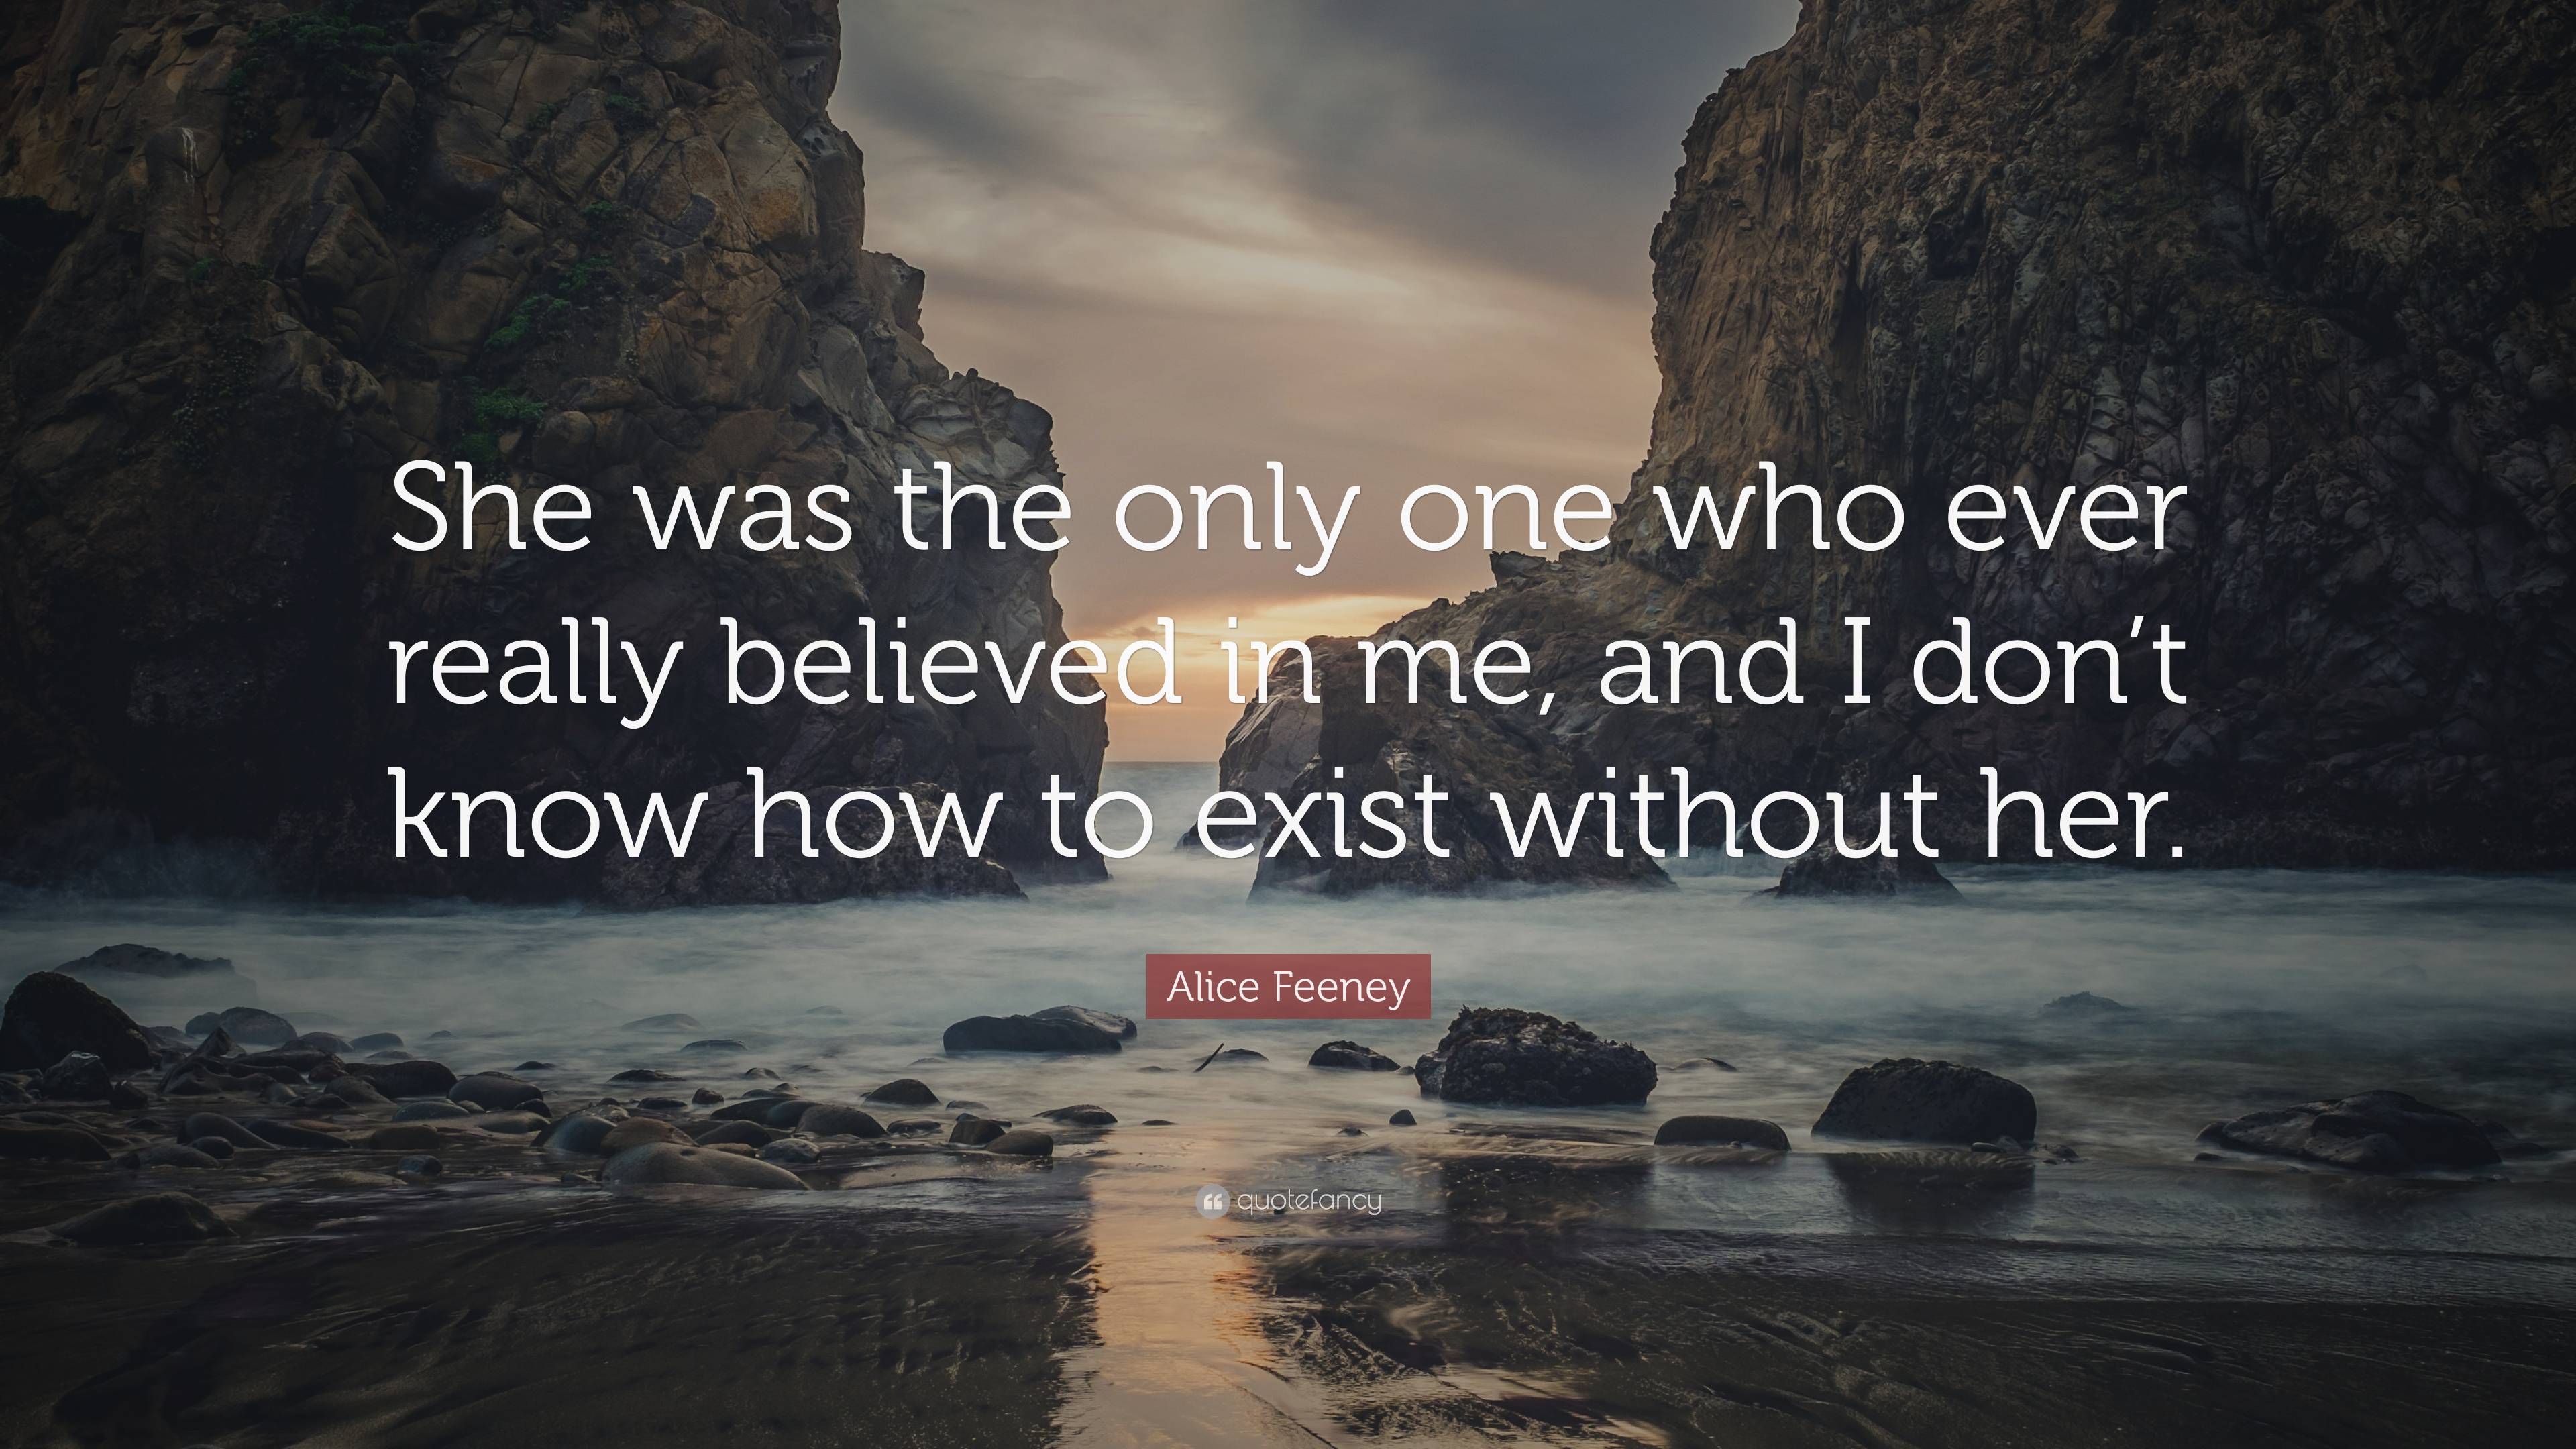 Alice Feeney Quote: “She was the only one who ever really believed in ...